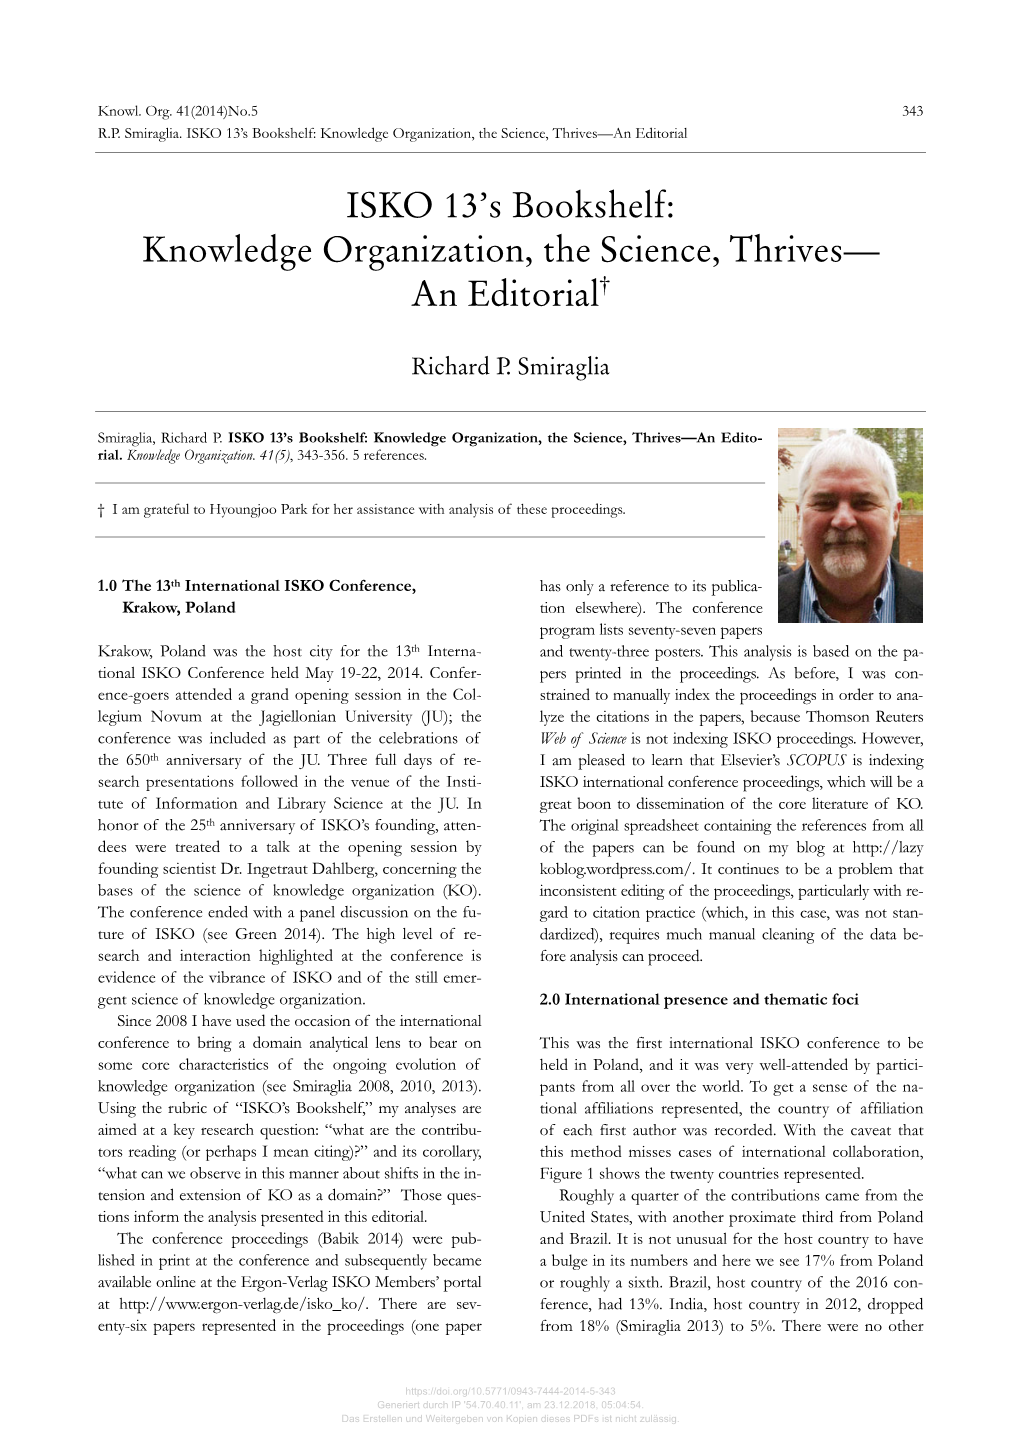 Knowledge Organization, the Science, Thrives—An Editorial